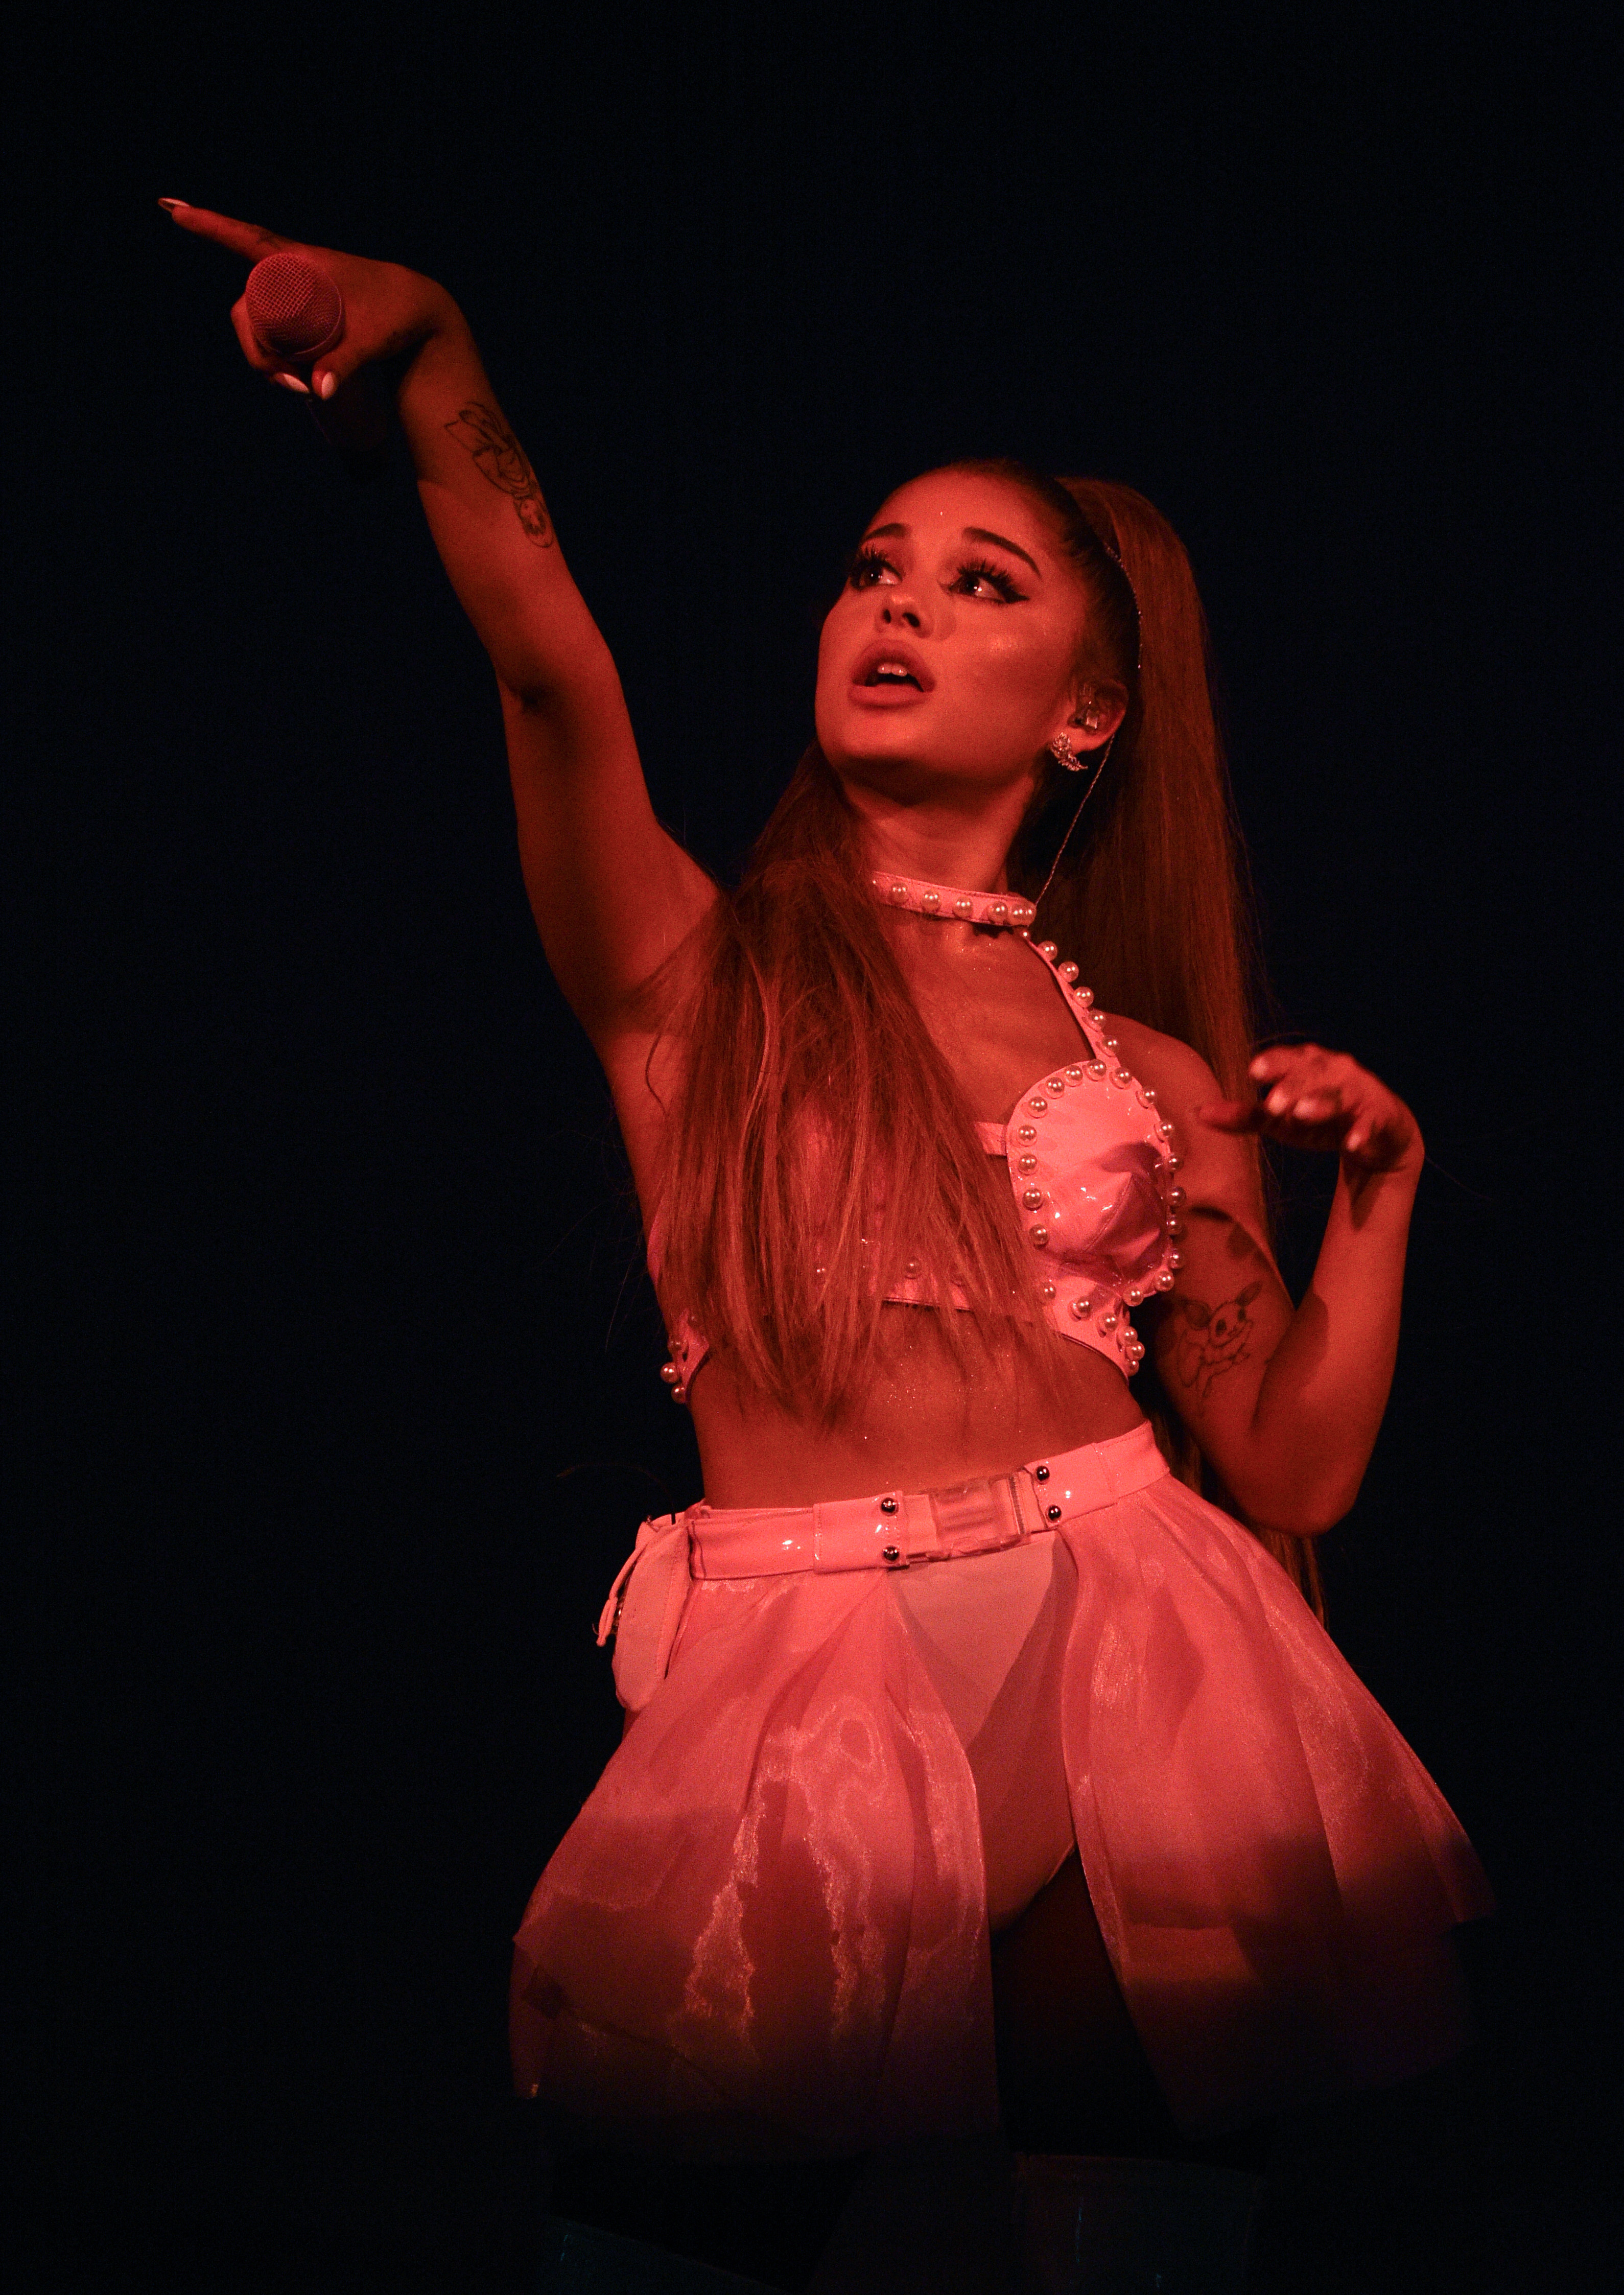 Ariana performing onstage